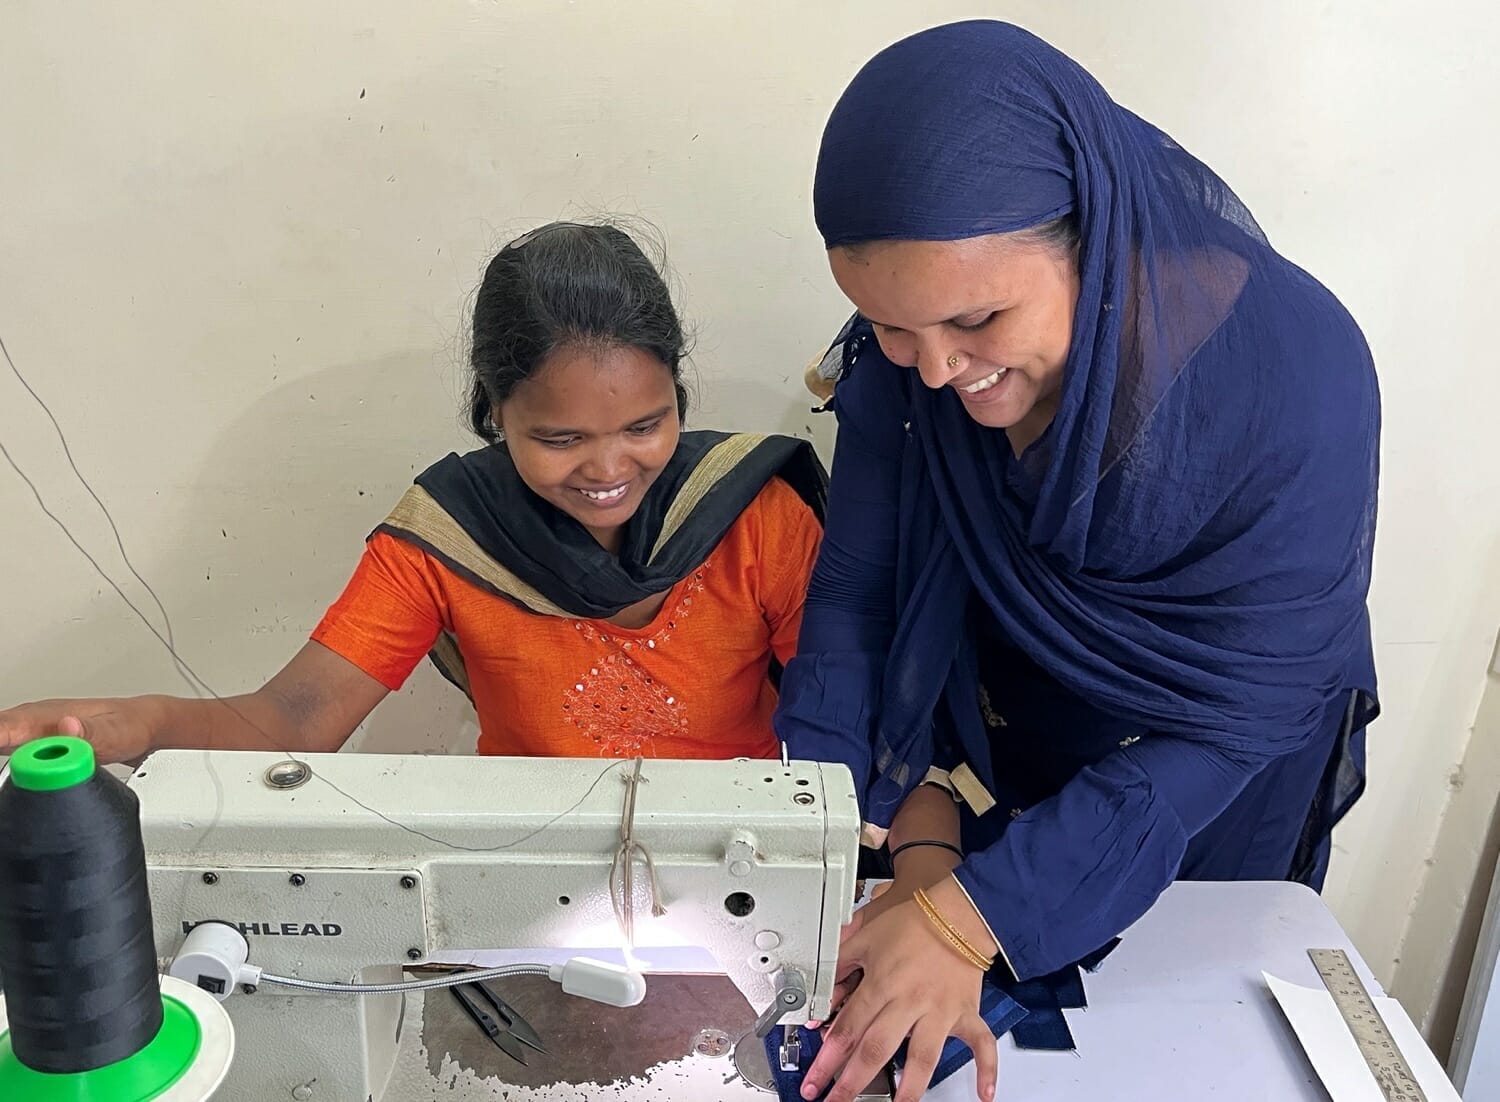 Two smiling women working together on a sewing machine